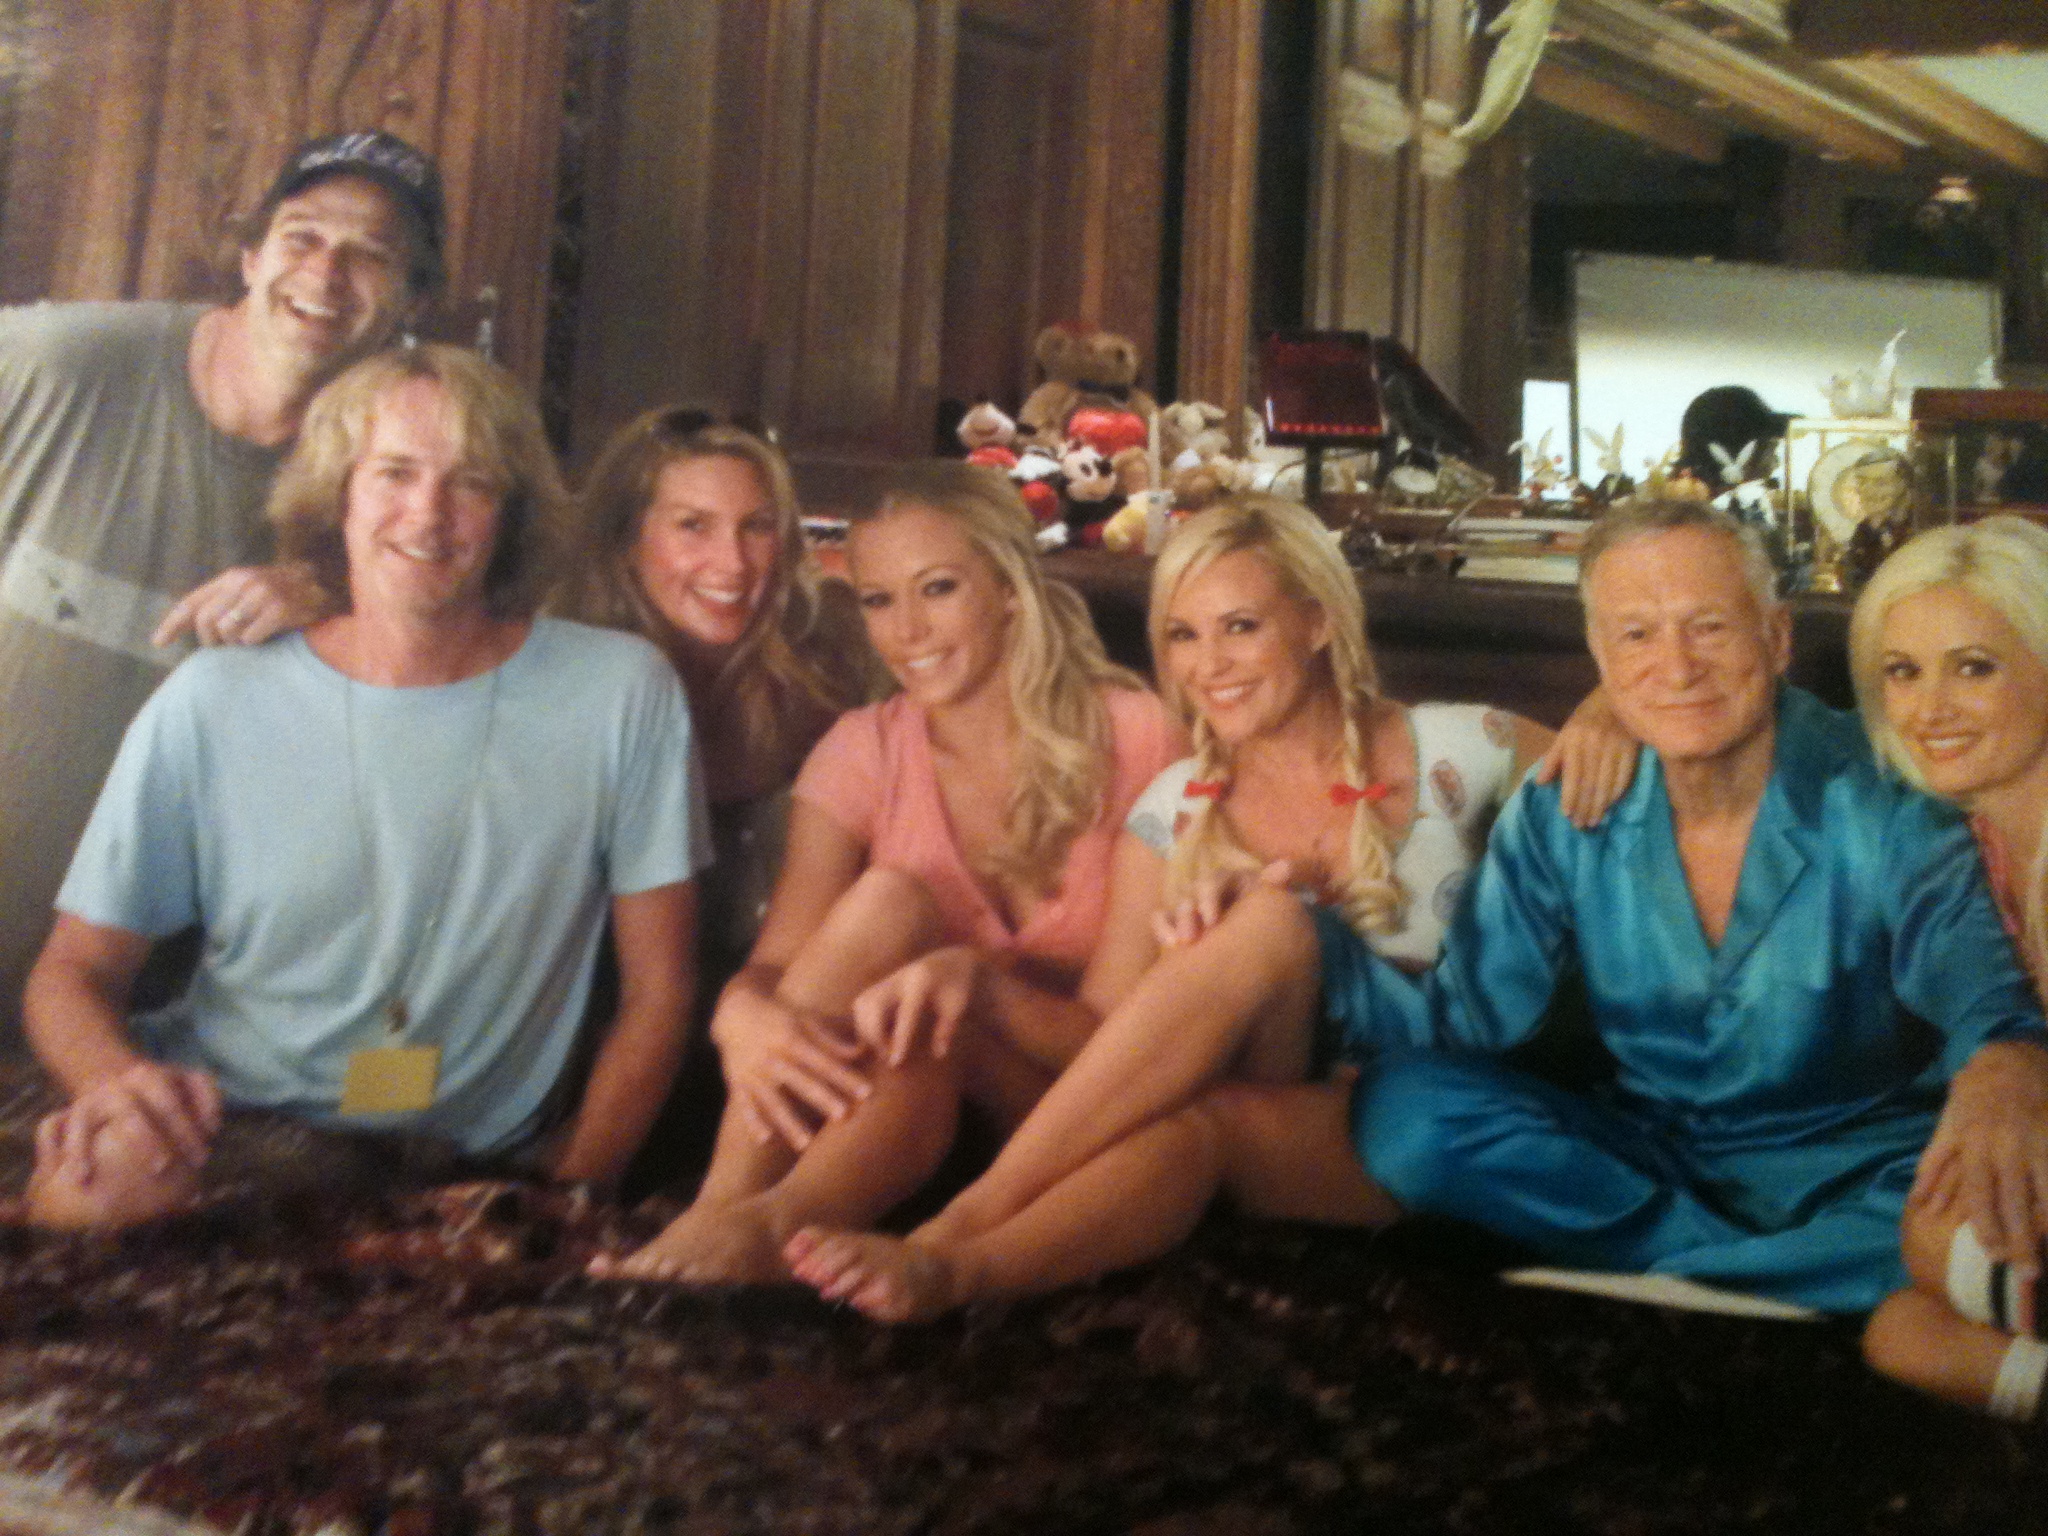 Allan Covert, Fred Wolf, Heather Parry, the Girls Next Door and Hef; the House Bunny, Wolf directing